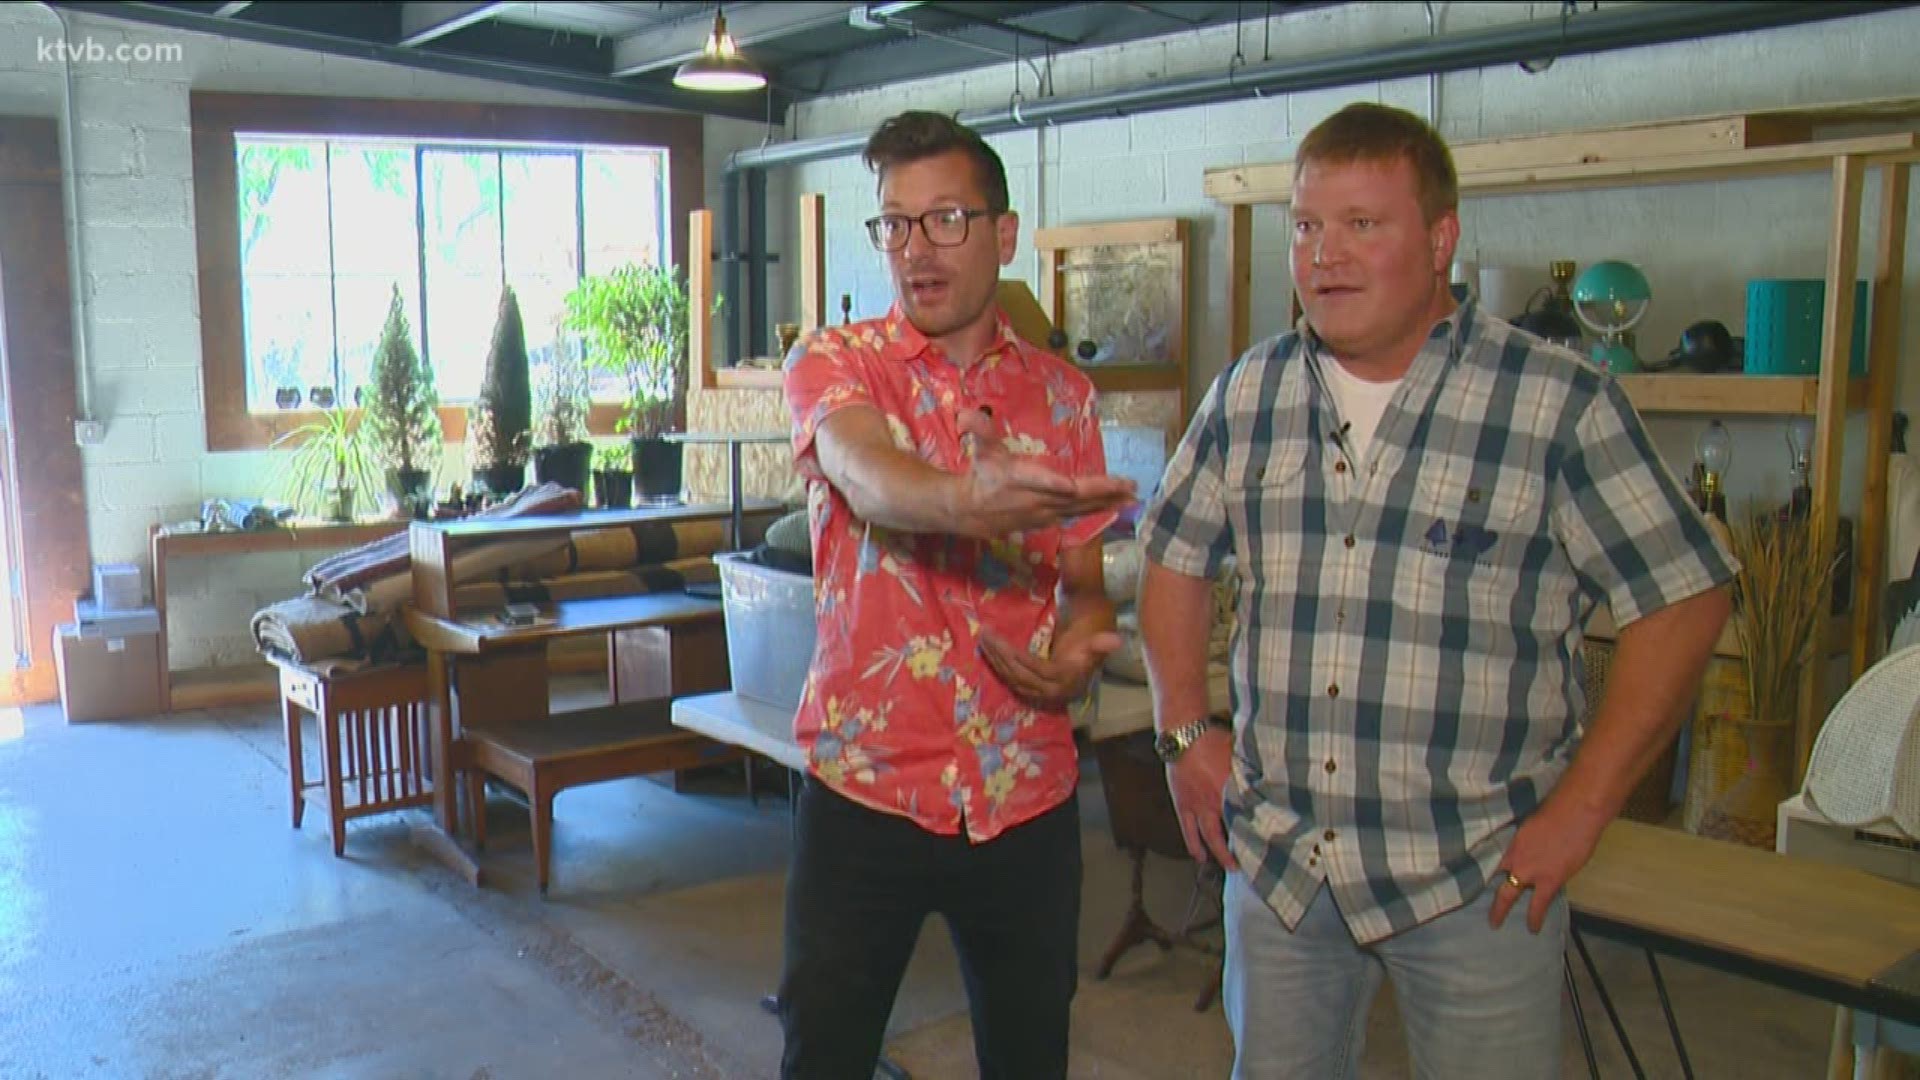 The stars of the HGTV show are hoping to raise money to help people trying to find affordable housing.